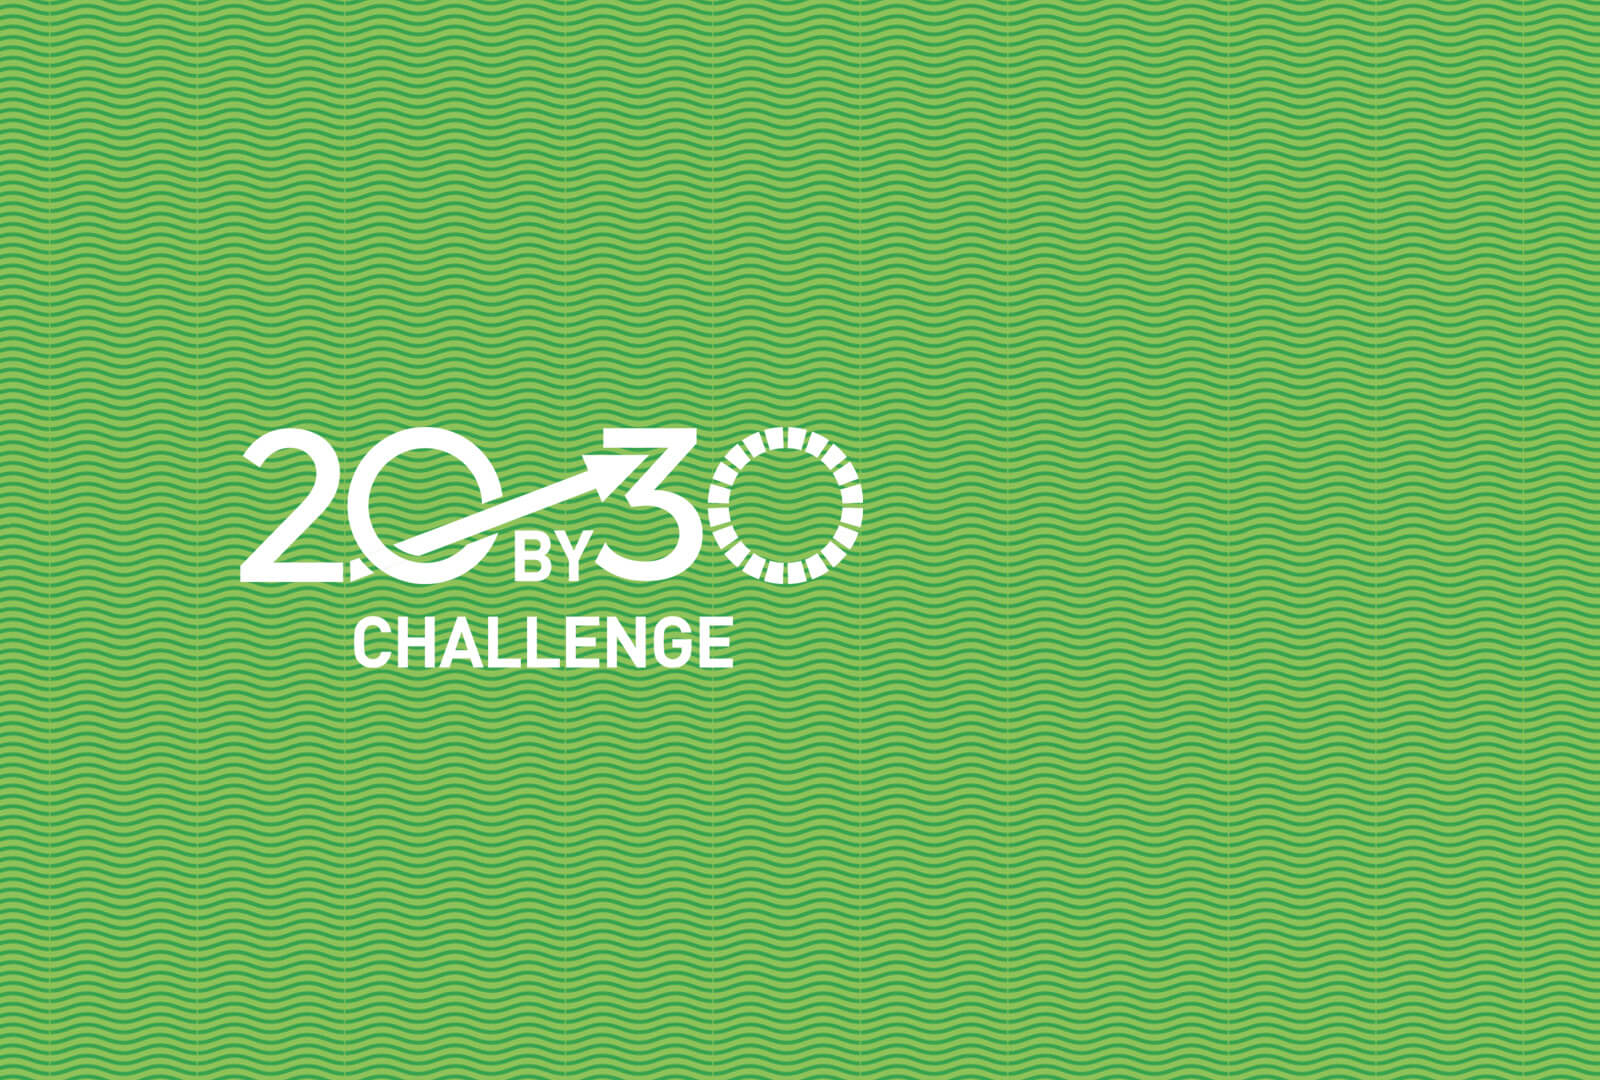 20 By 30 Challenge